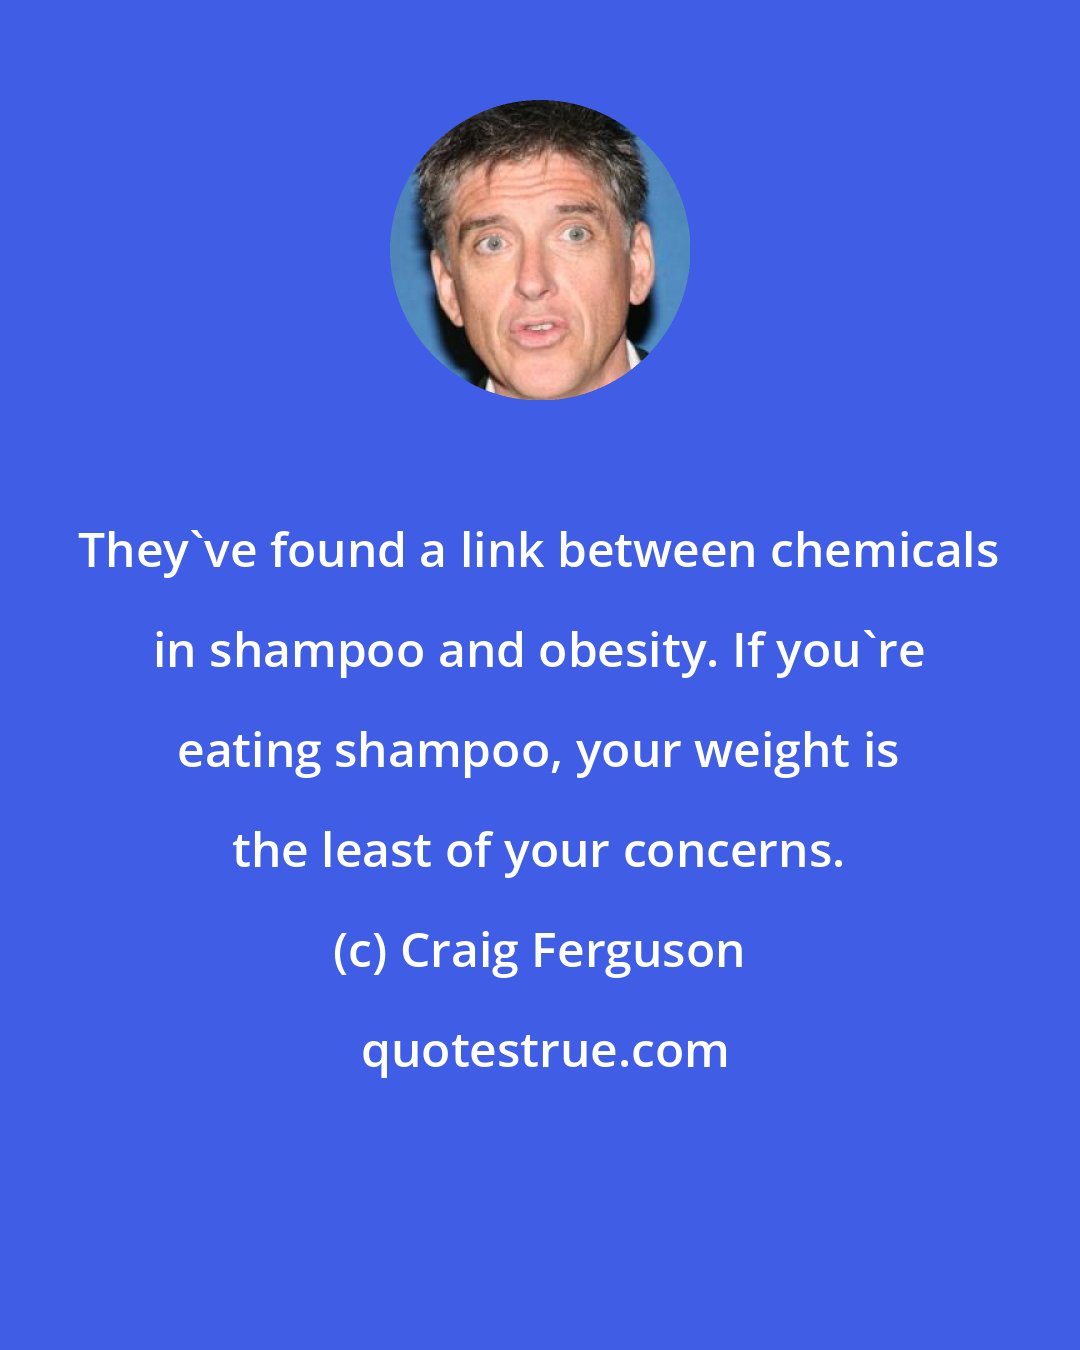 Craig Ferguson: They've found a link between chemicals in shampoo and obesity. If you're eating shampoo, your weight is the least of your concerns.